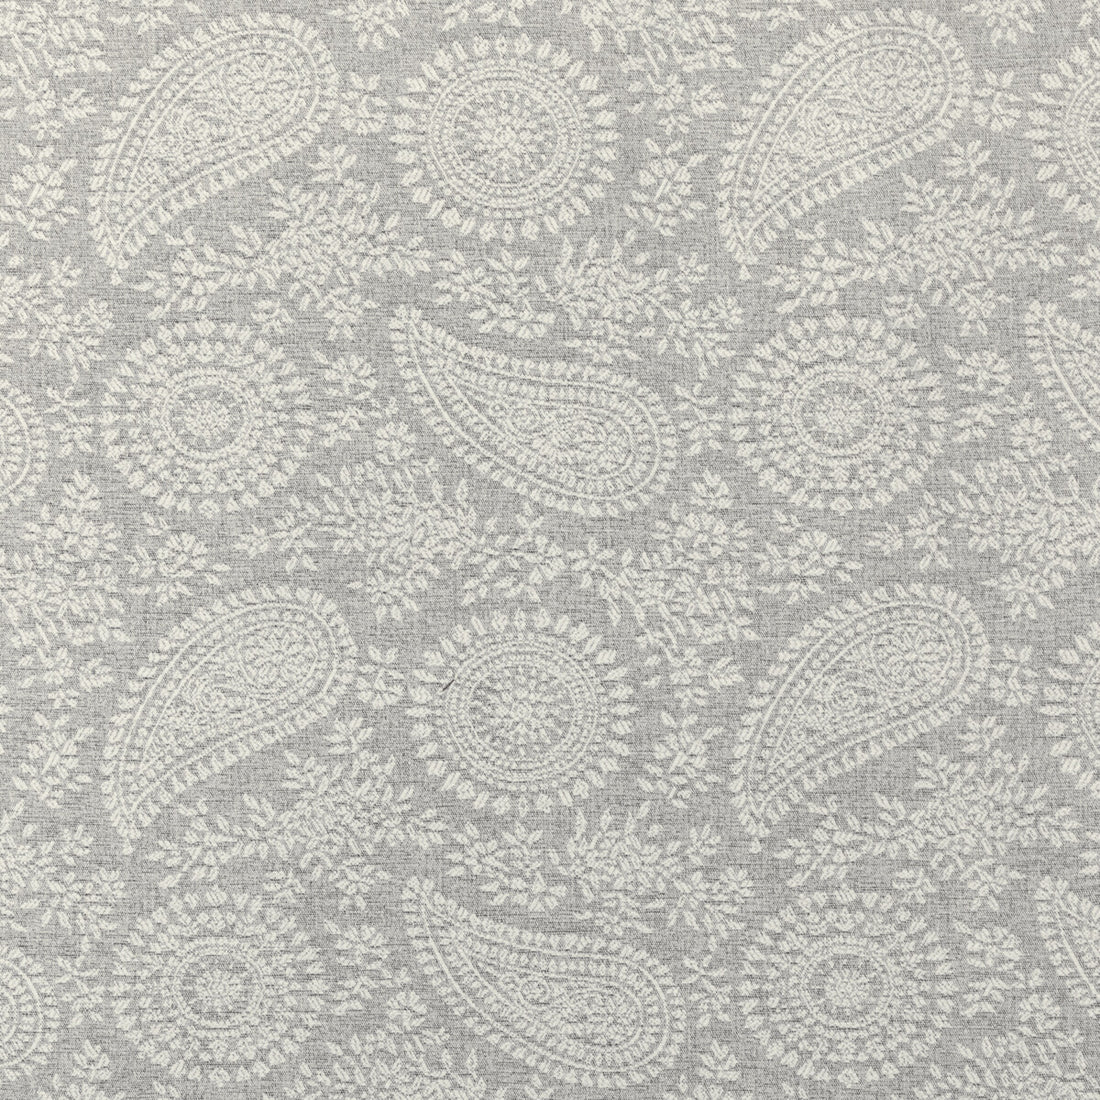 Wylder fabric in tusk color - pattern 36269.11.0 - by Kravet Contract in the Gis Crypton collection